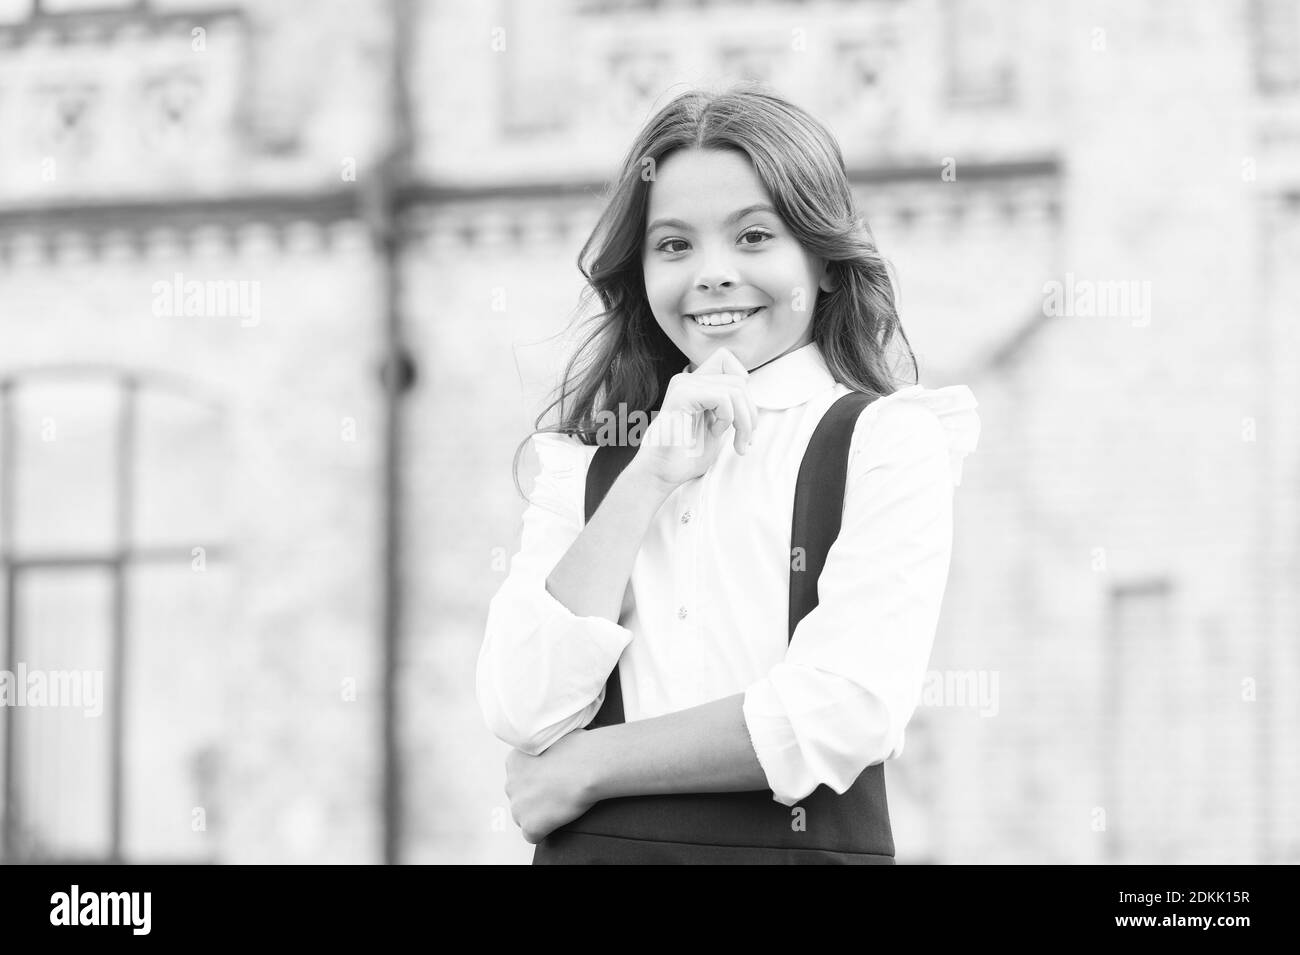 Back to school kids uniform Black and White Stock Photos & Images - Alamy